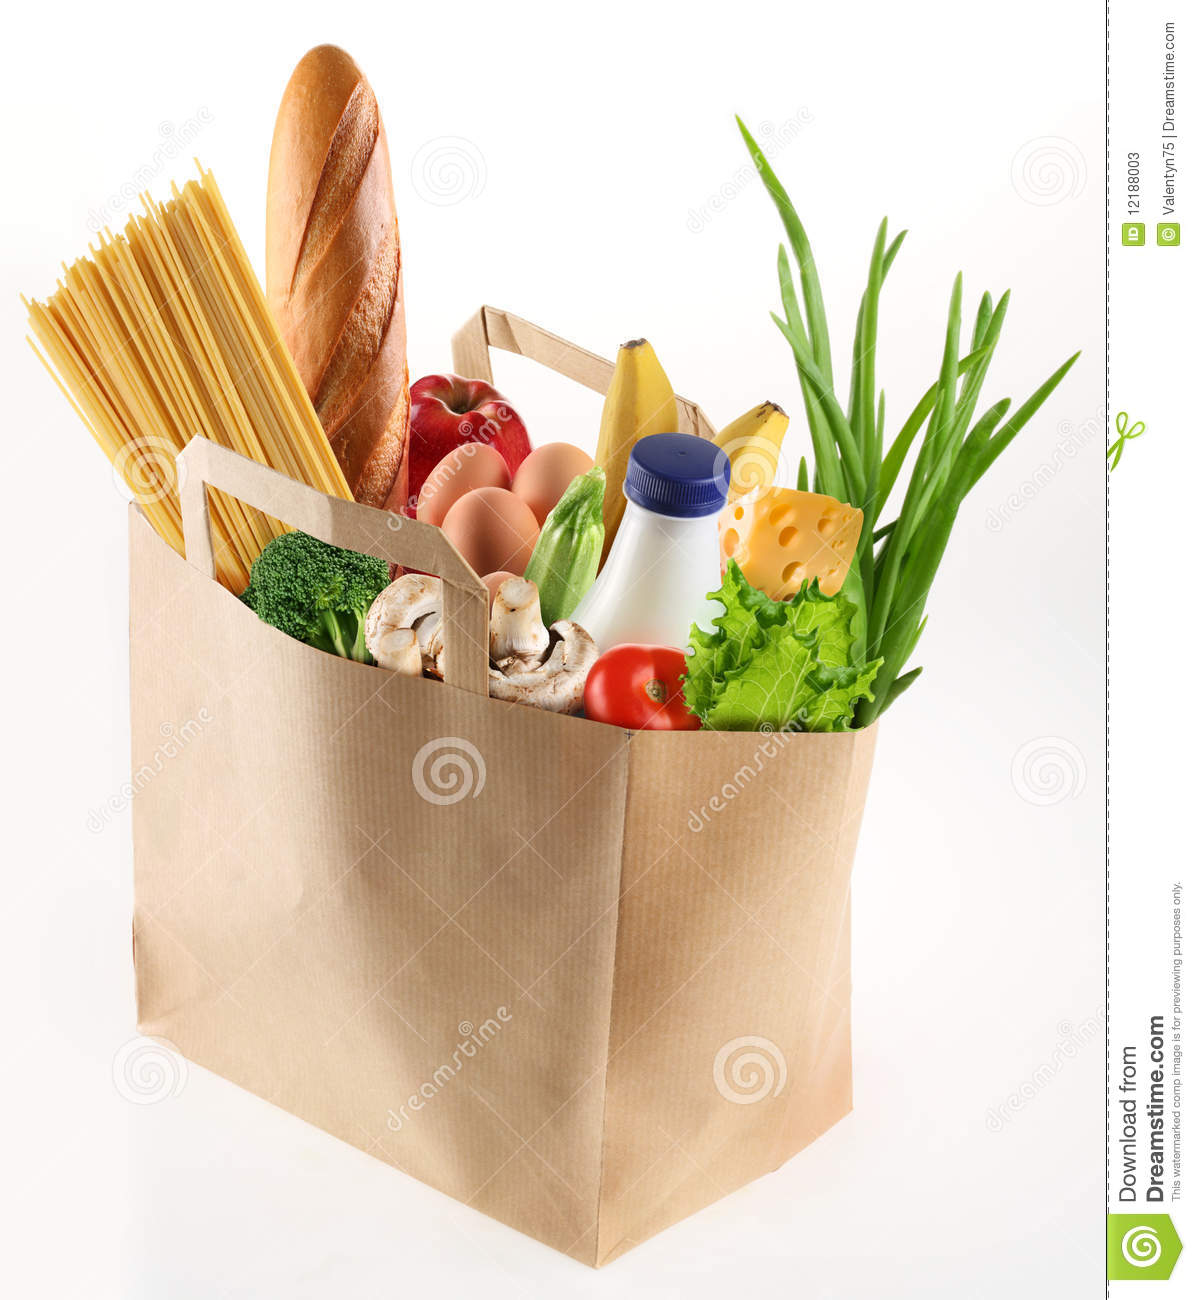 Paper Bag With Food On A White Background Mr No Pr No 5 7733 185